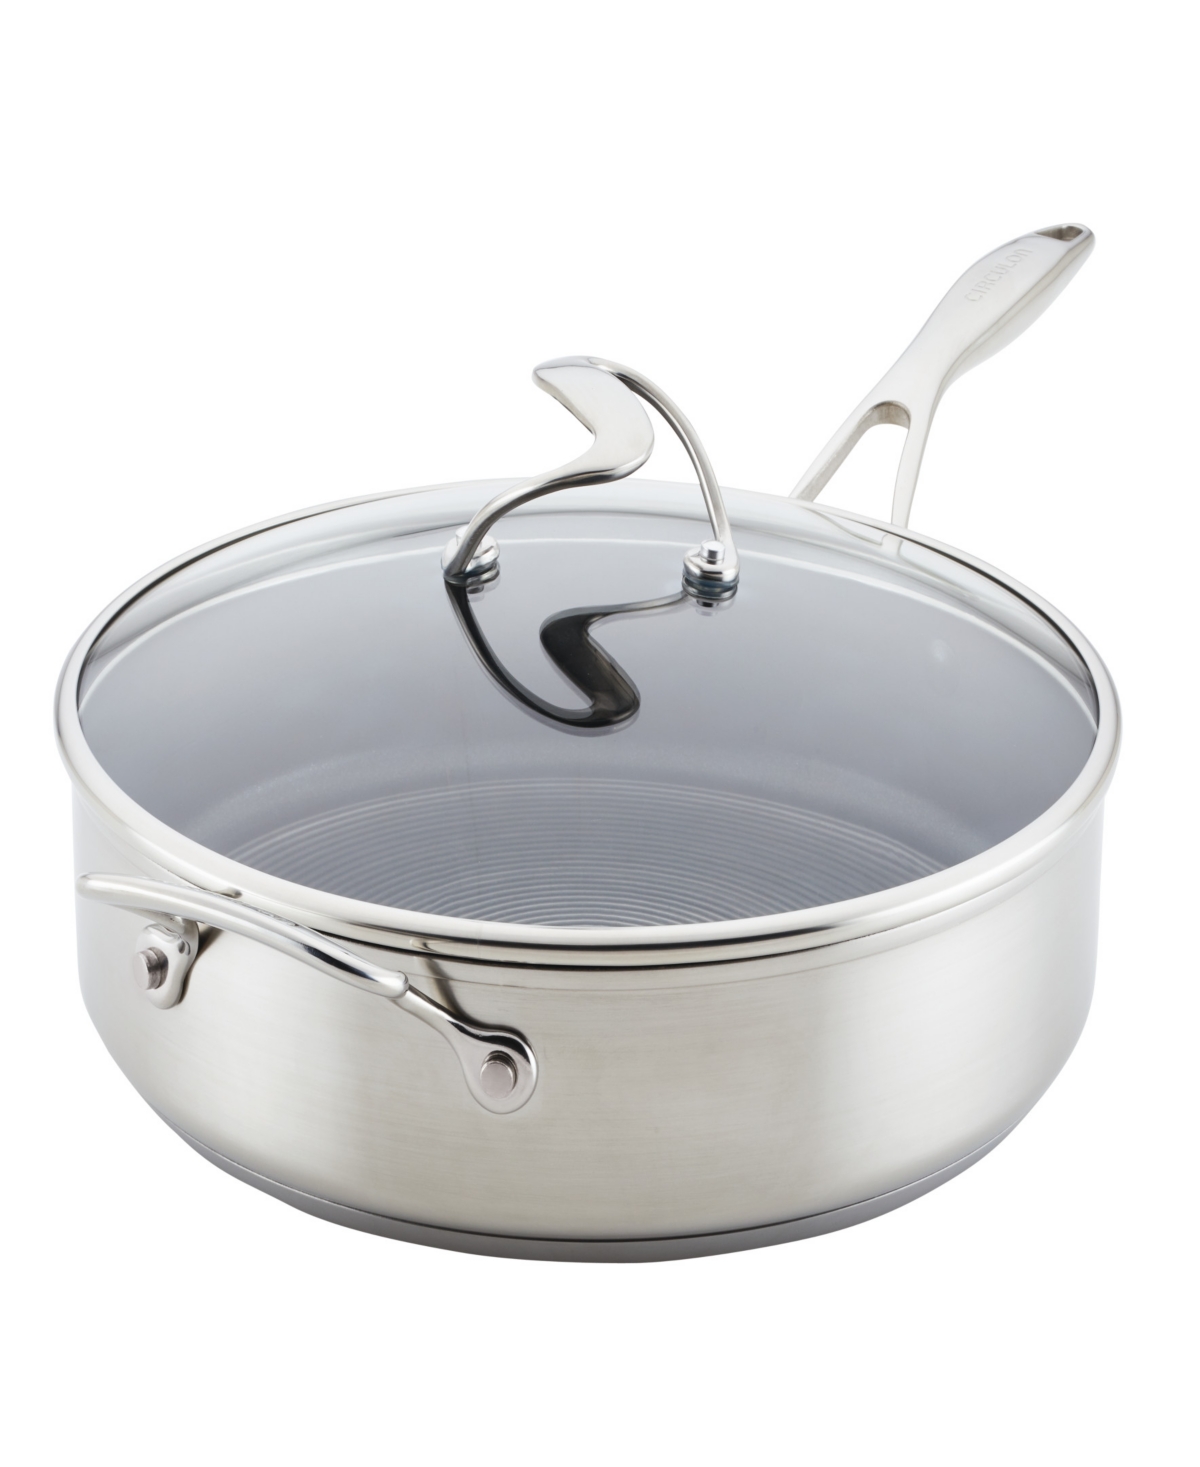 Circulon Stainless Steel 5 Quart Induction Saute Pan With Lid And Steelshield Hybrid Stainless And Non-stick 